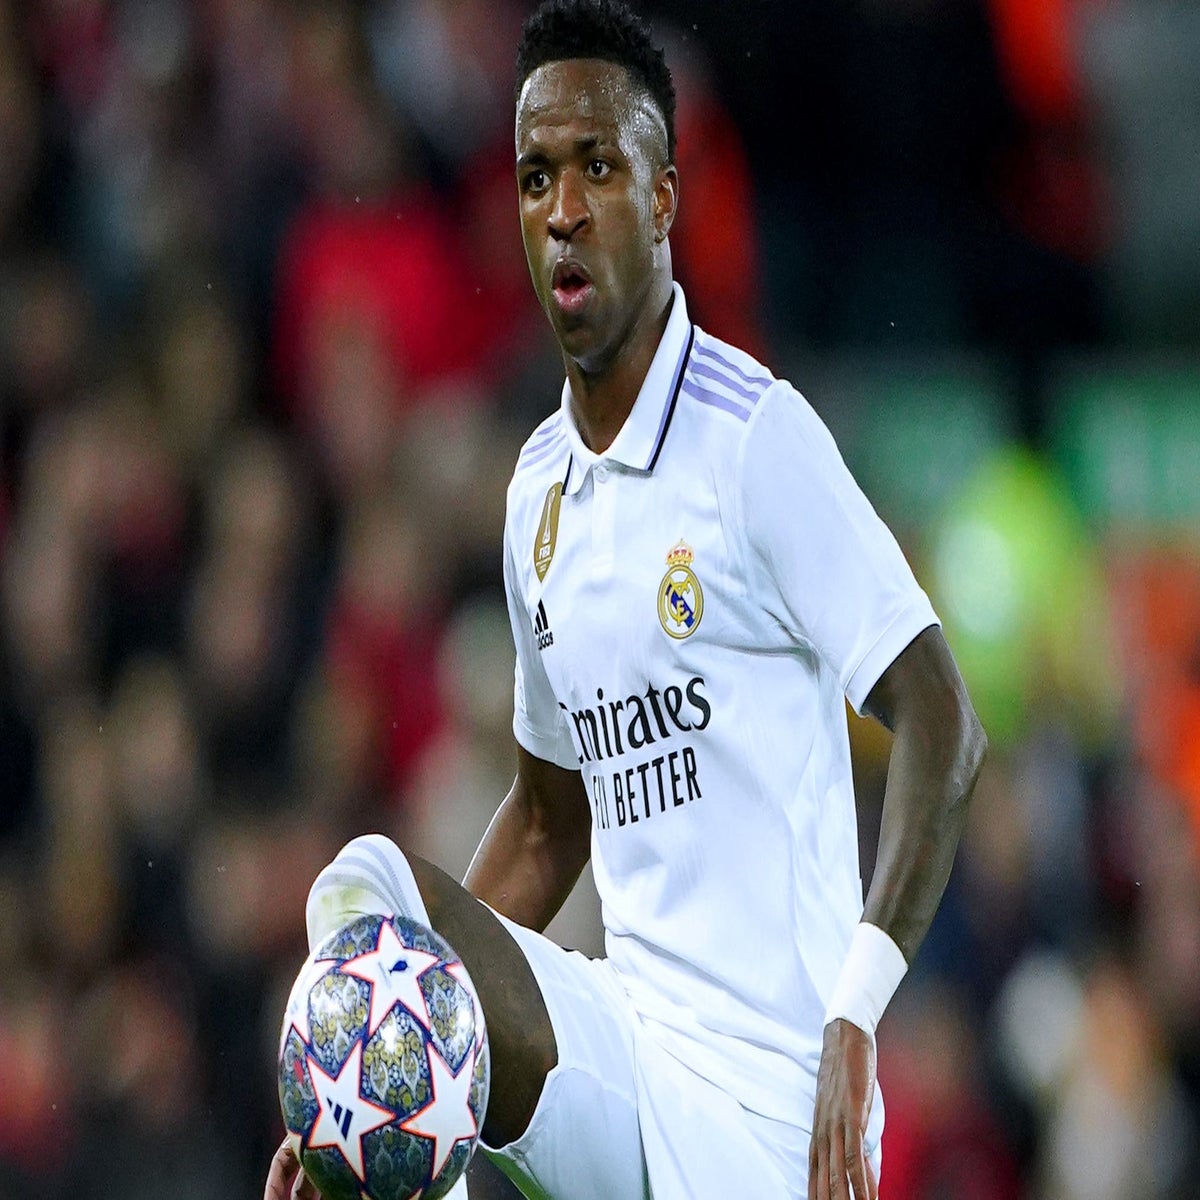 Vinicius training to take penalties for Real Madrid -report